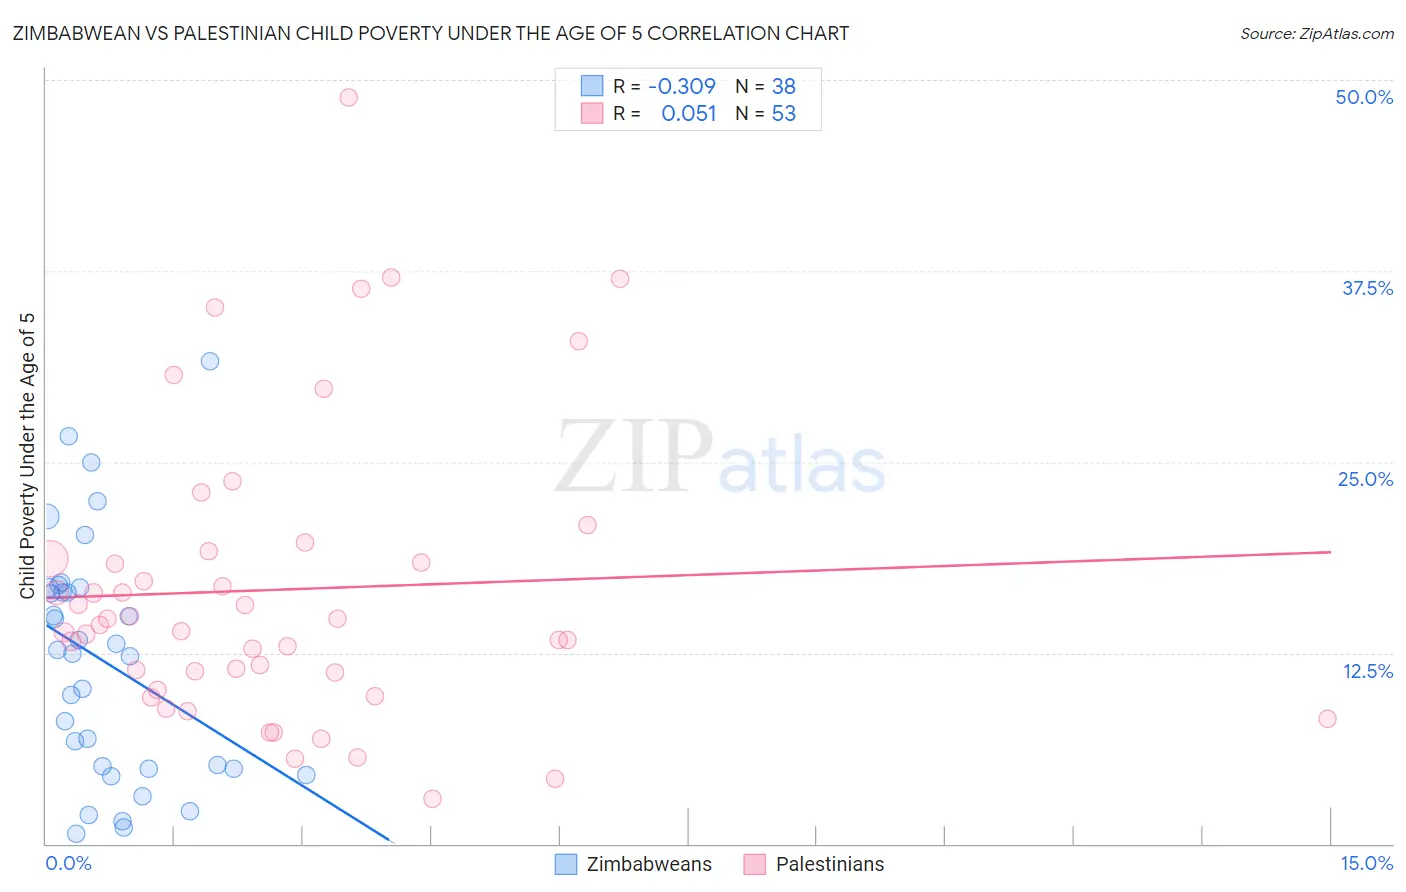 Zimbabwean vs Palestinian Child Poverty Under the Age of 5